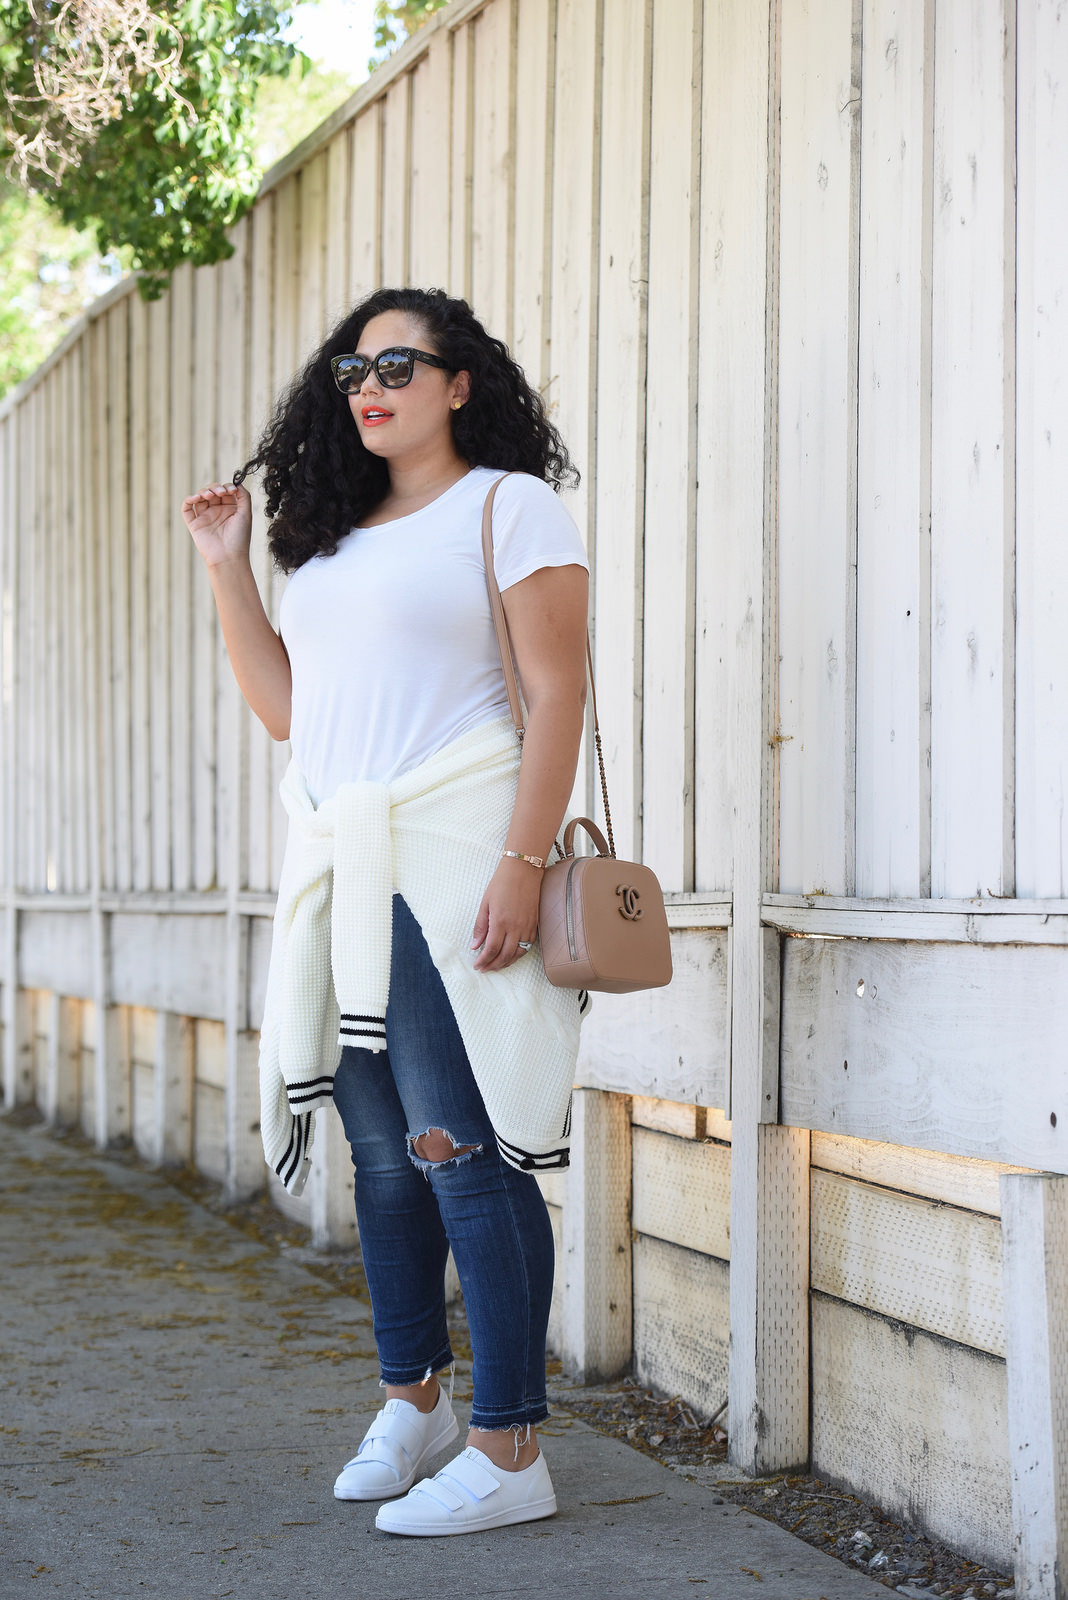 Tanesha Awasthi, also known as Girl With Curves, wearing a white tee, plus size skinny jeans, white sneakers and Chanel bag.